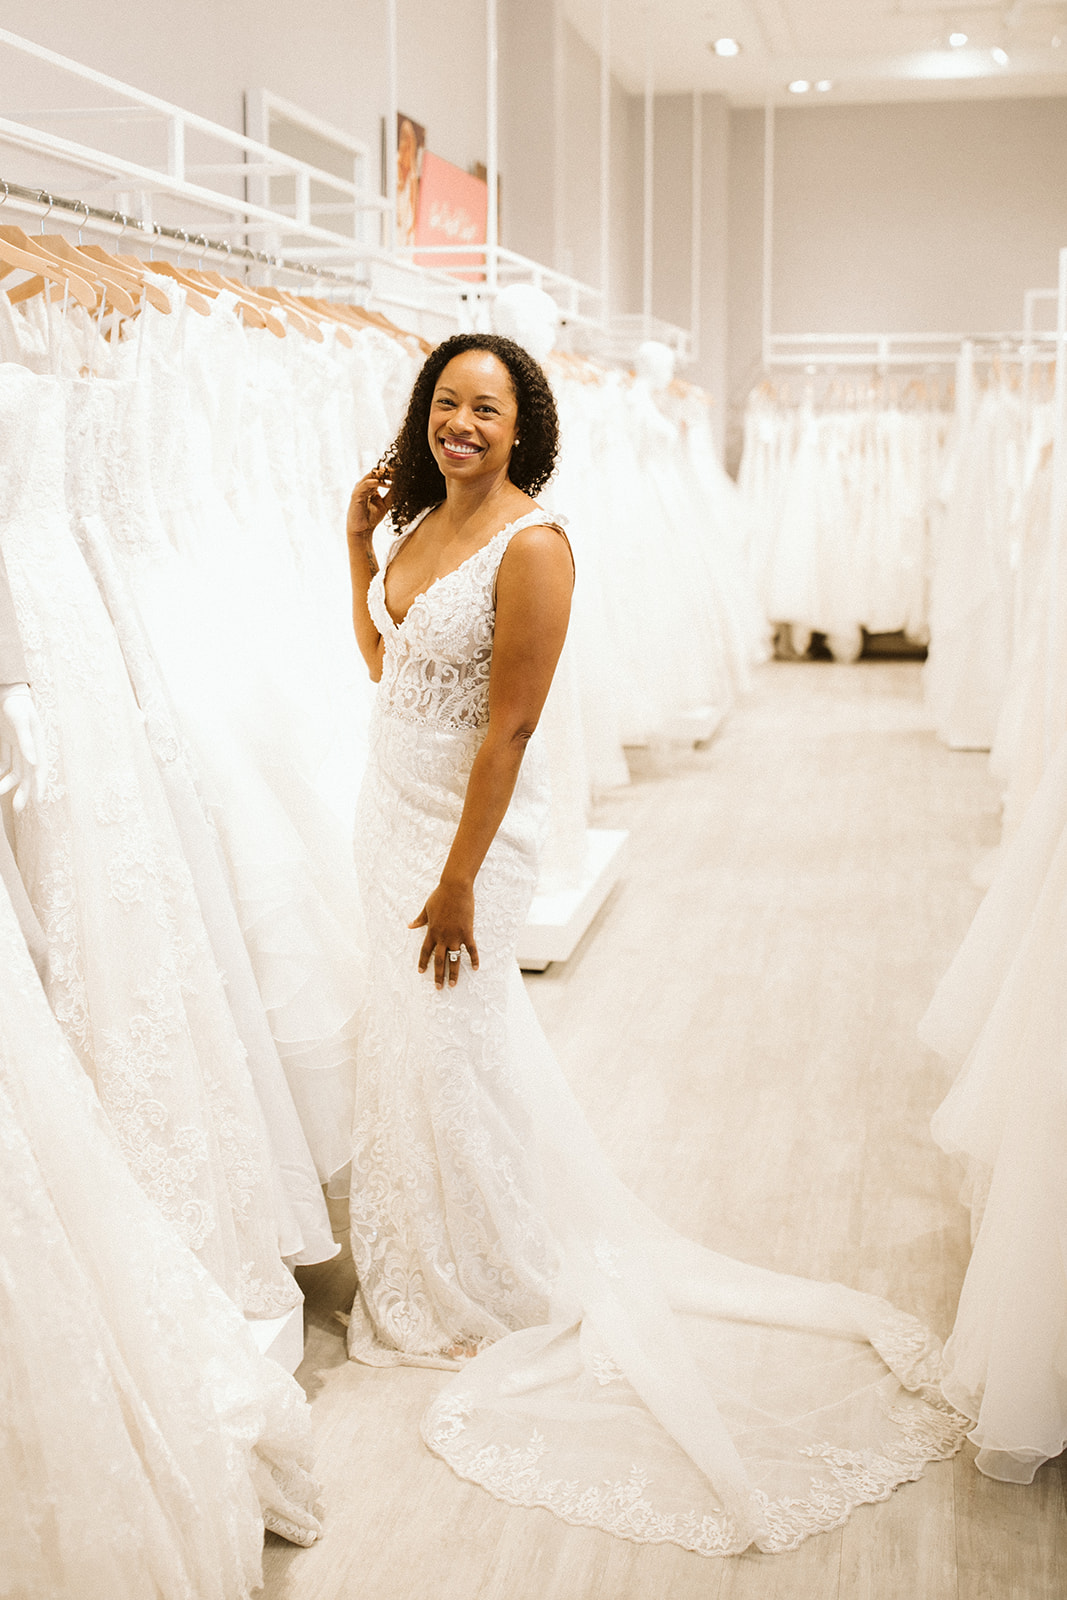 A woman with coiled dark hair wears a lace sleeveless wedding gown with a train and smiles as she touches her hair in the show room at David's Bridal